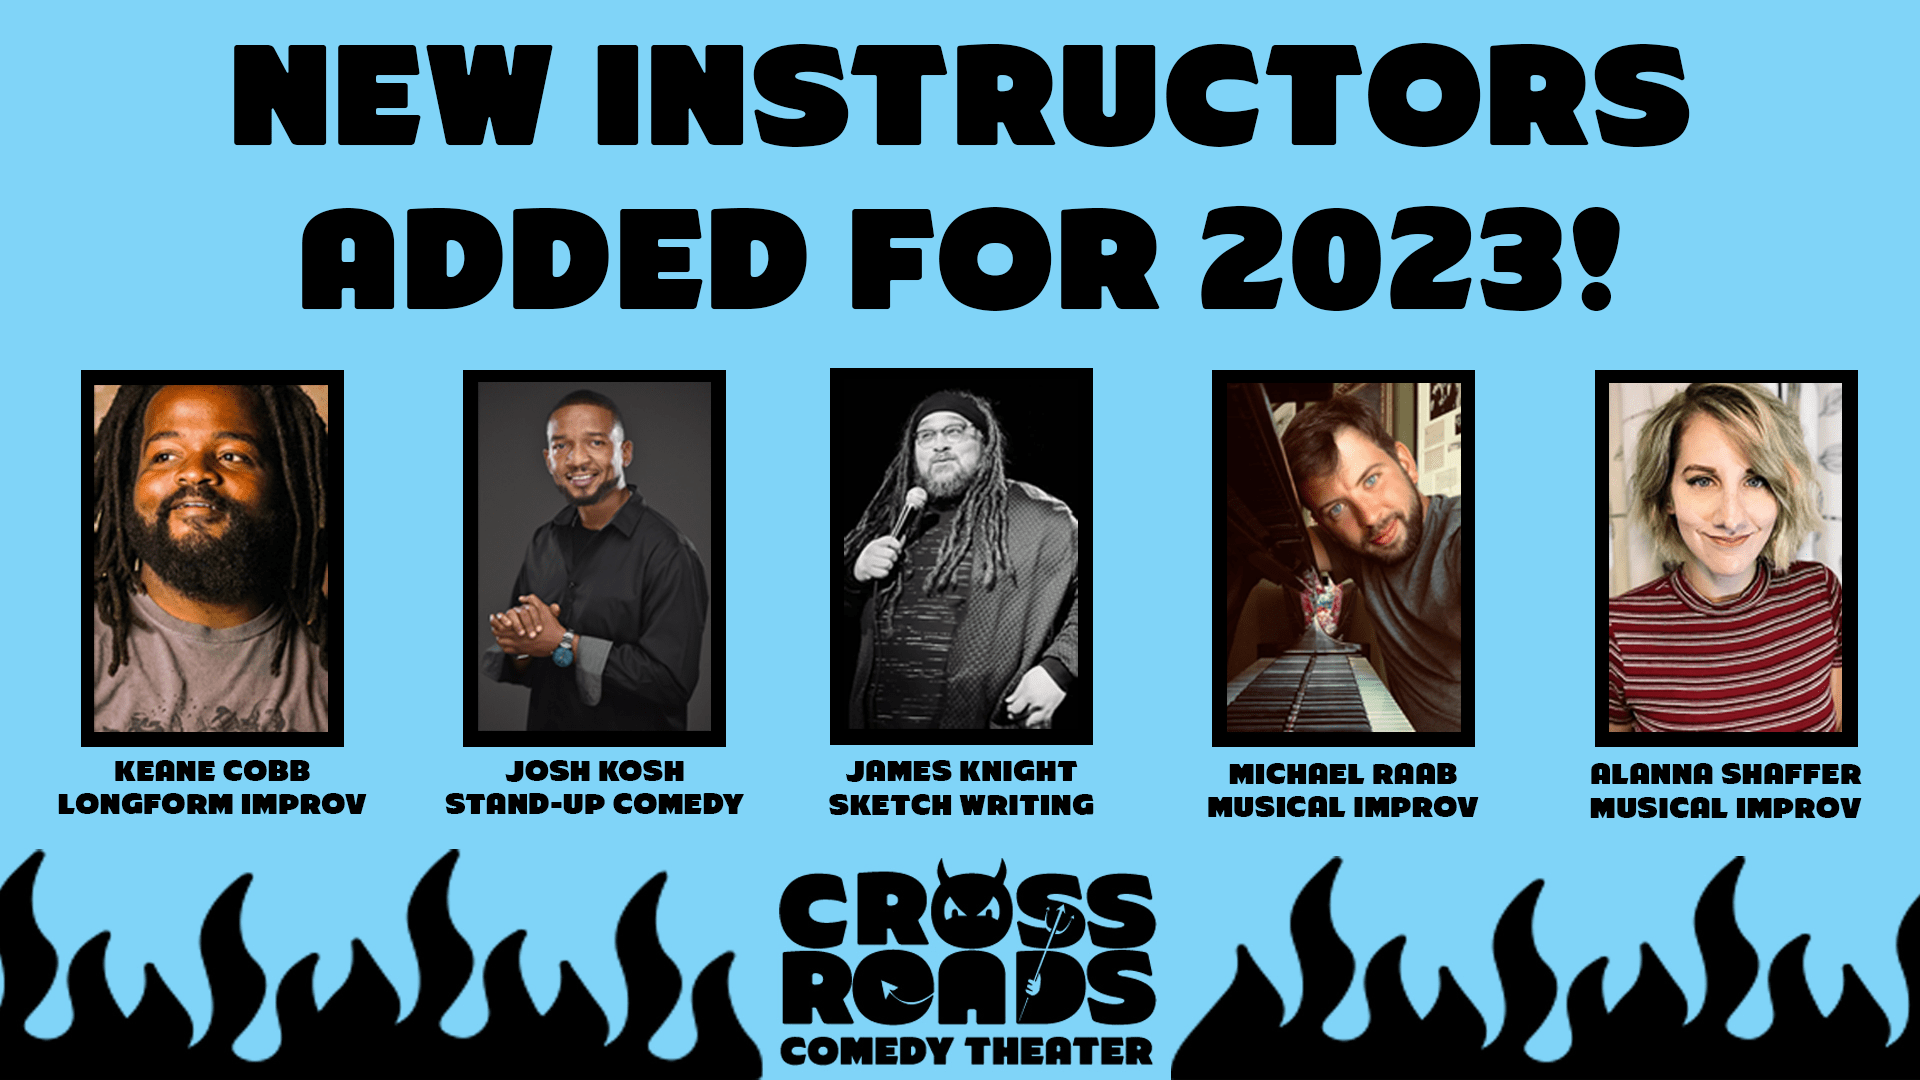 New Instructors Added for 2023!